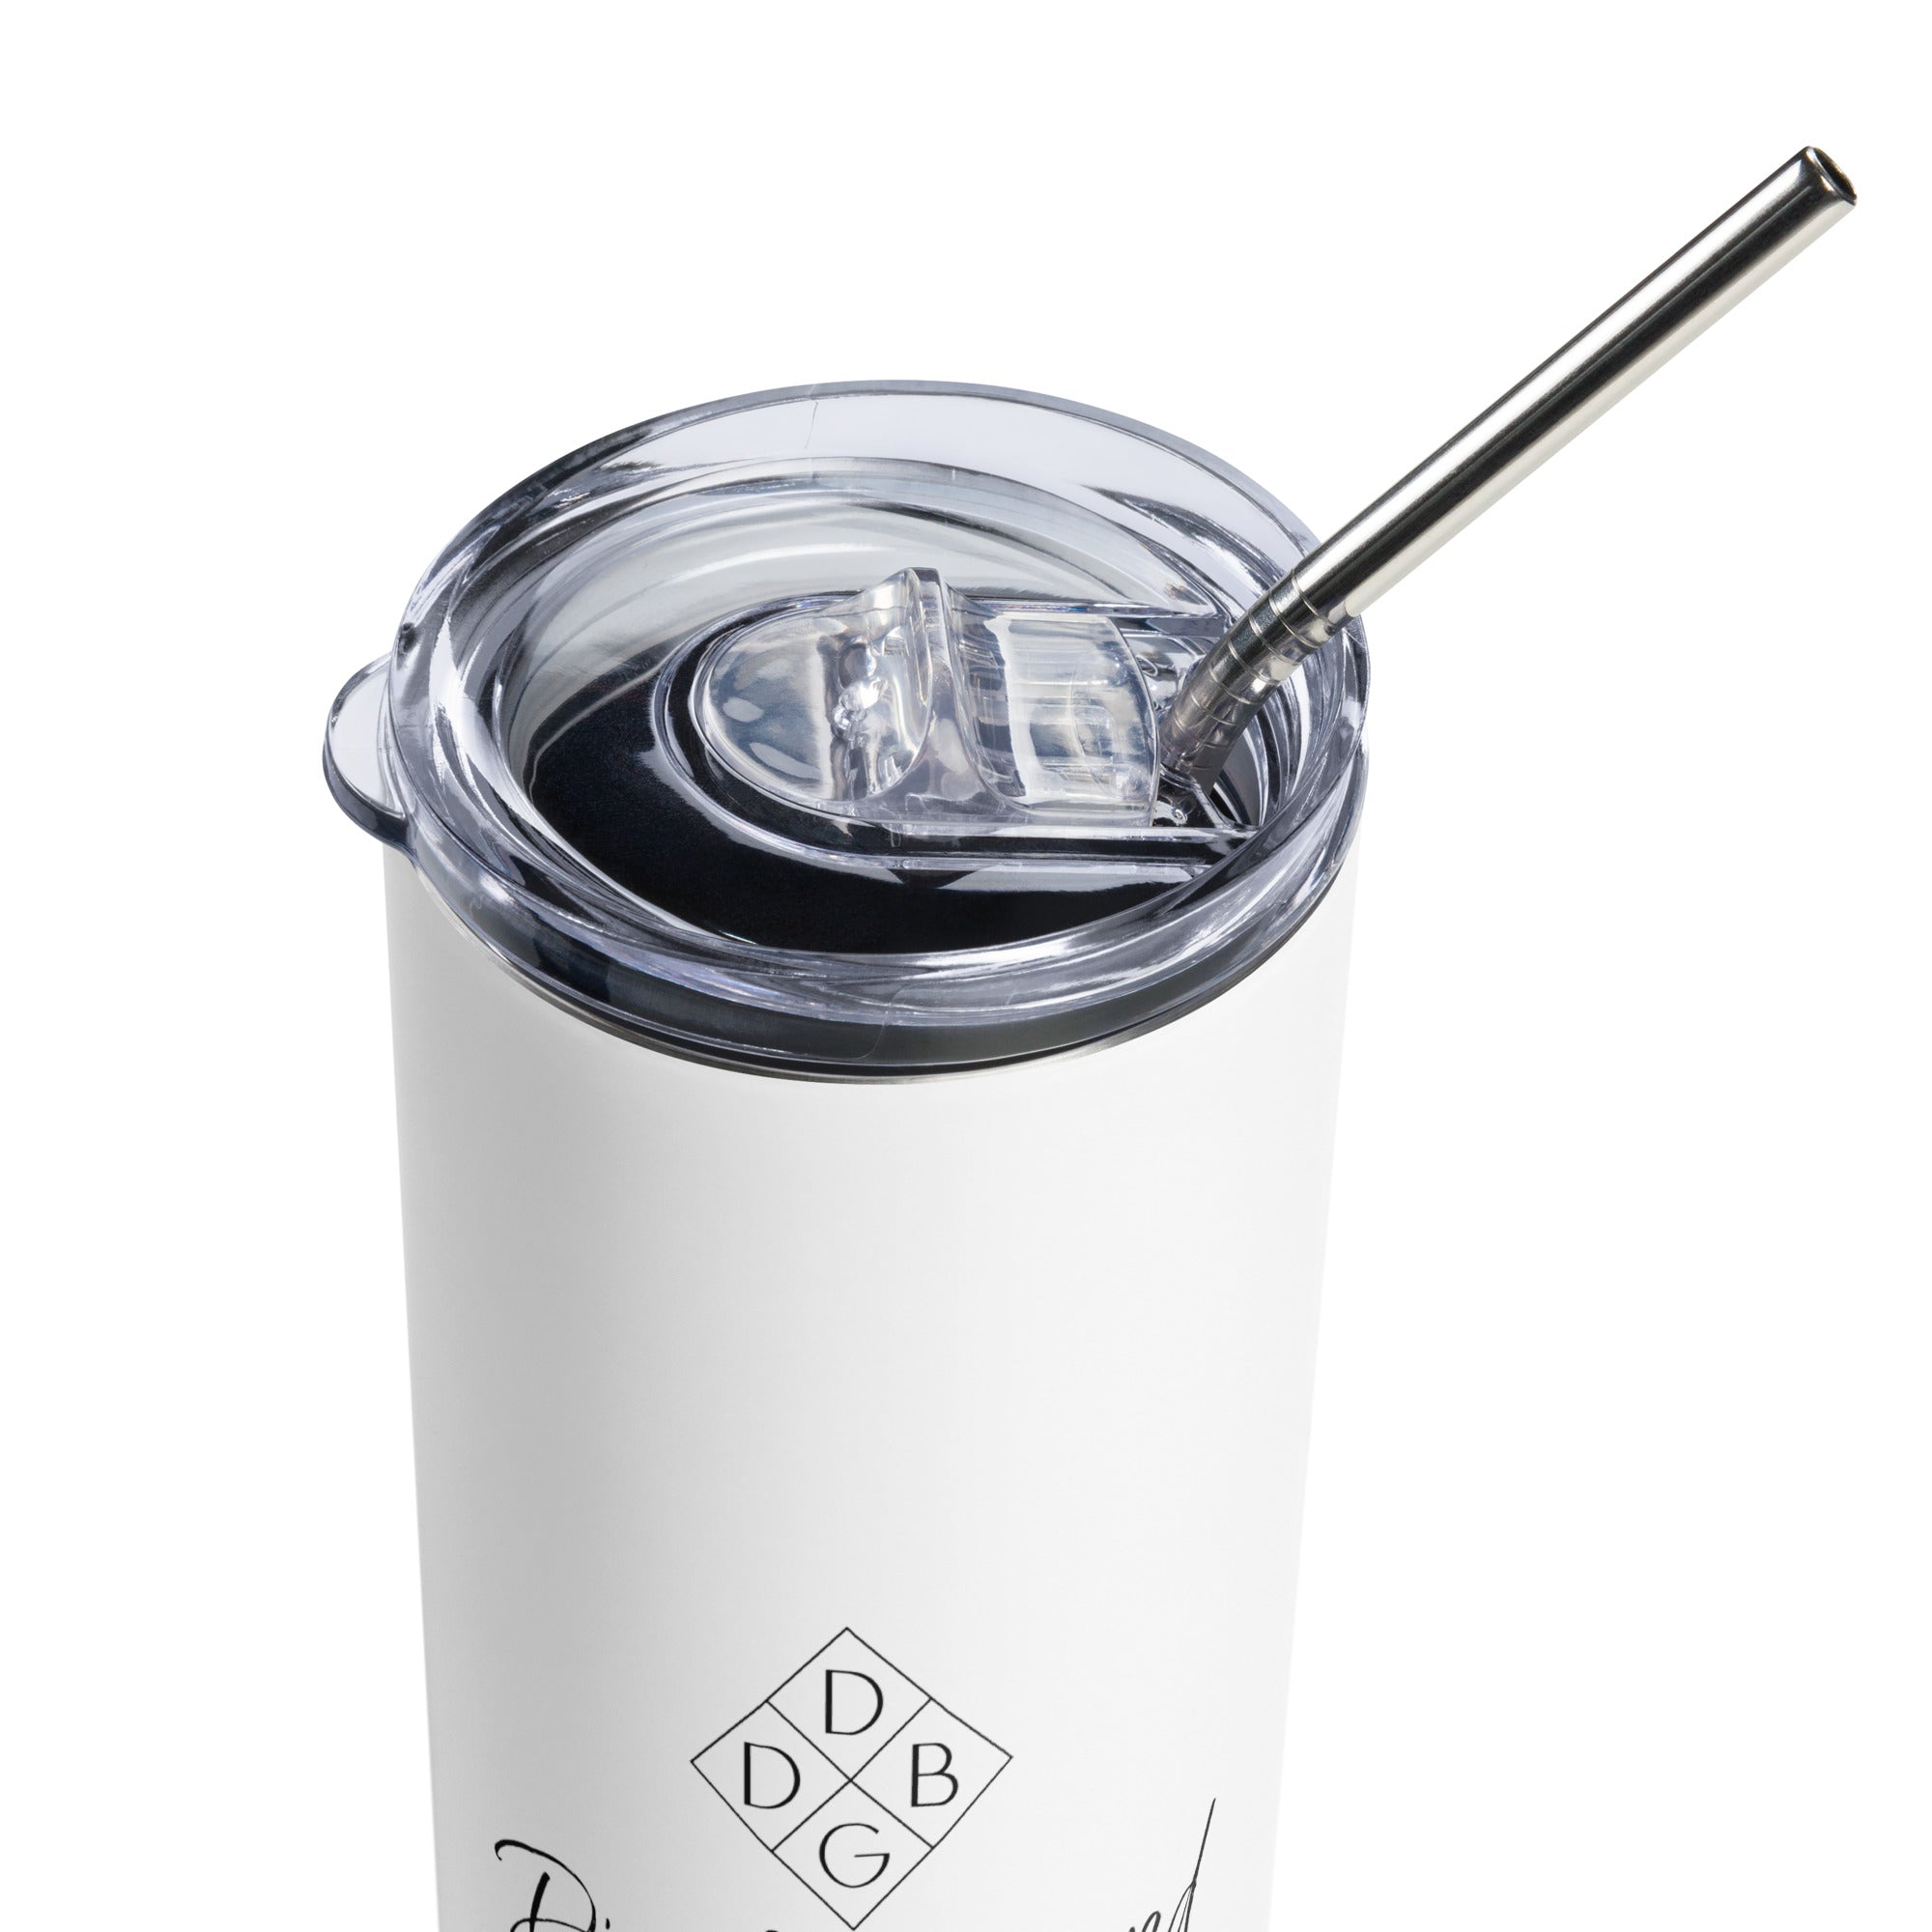 DDBG Stainless Steel Tumbler - White